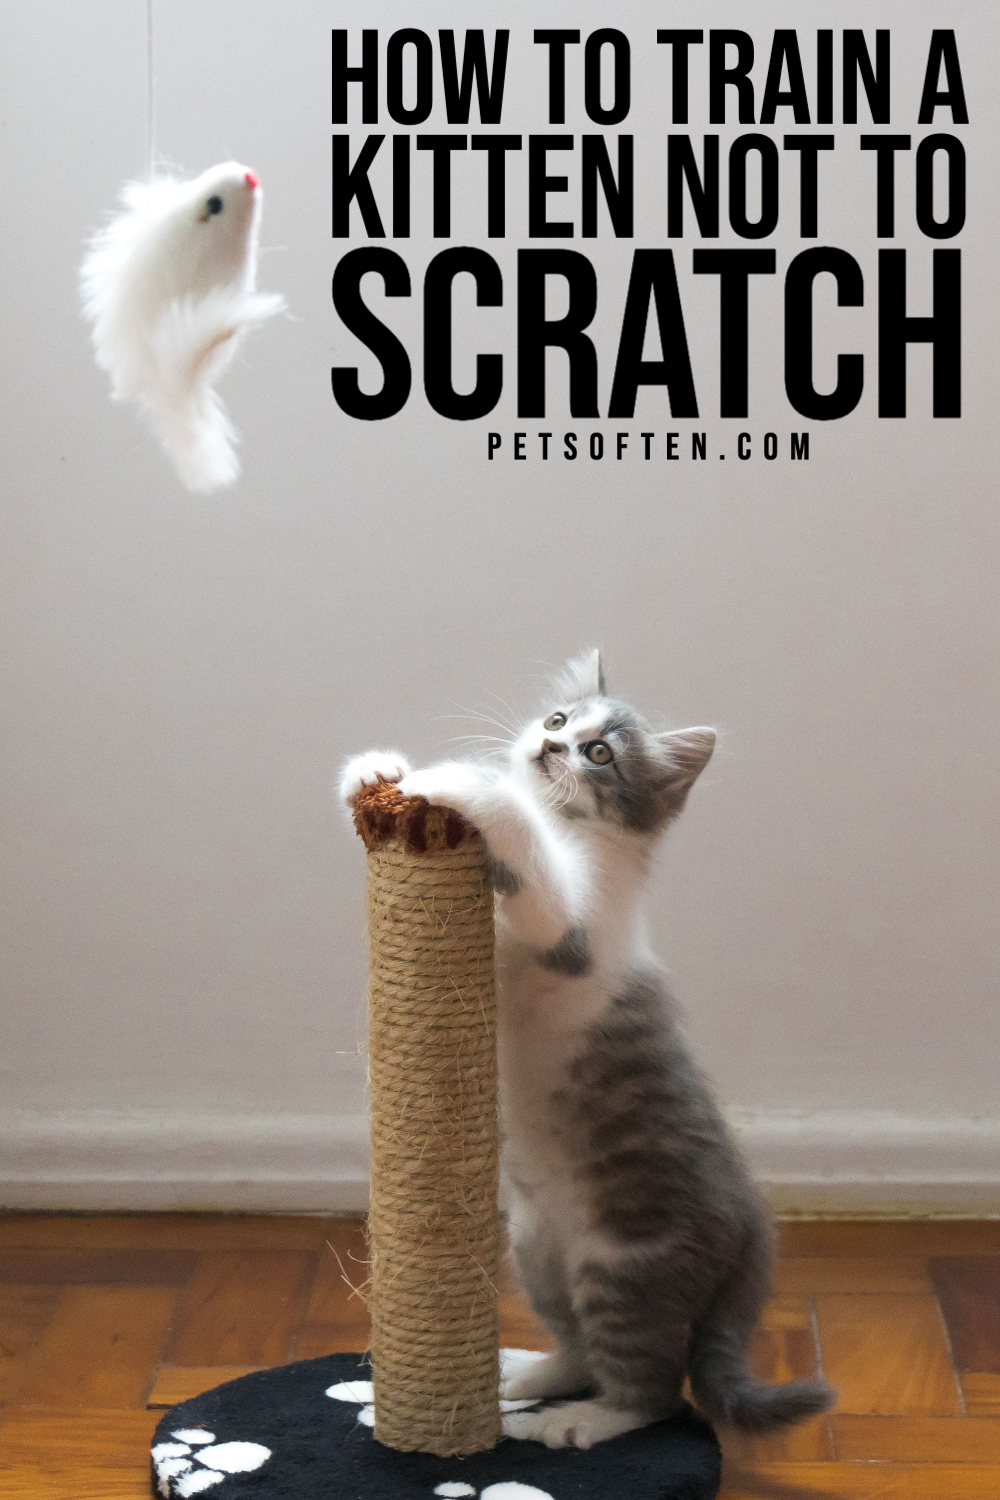 How to Train a Kitten Not to Scratch